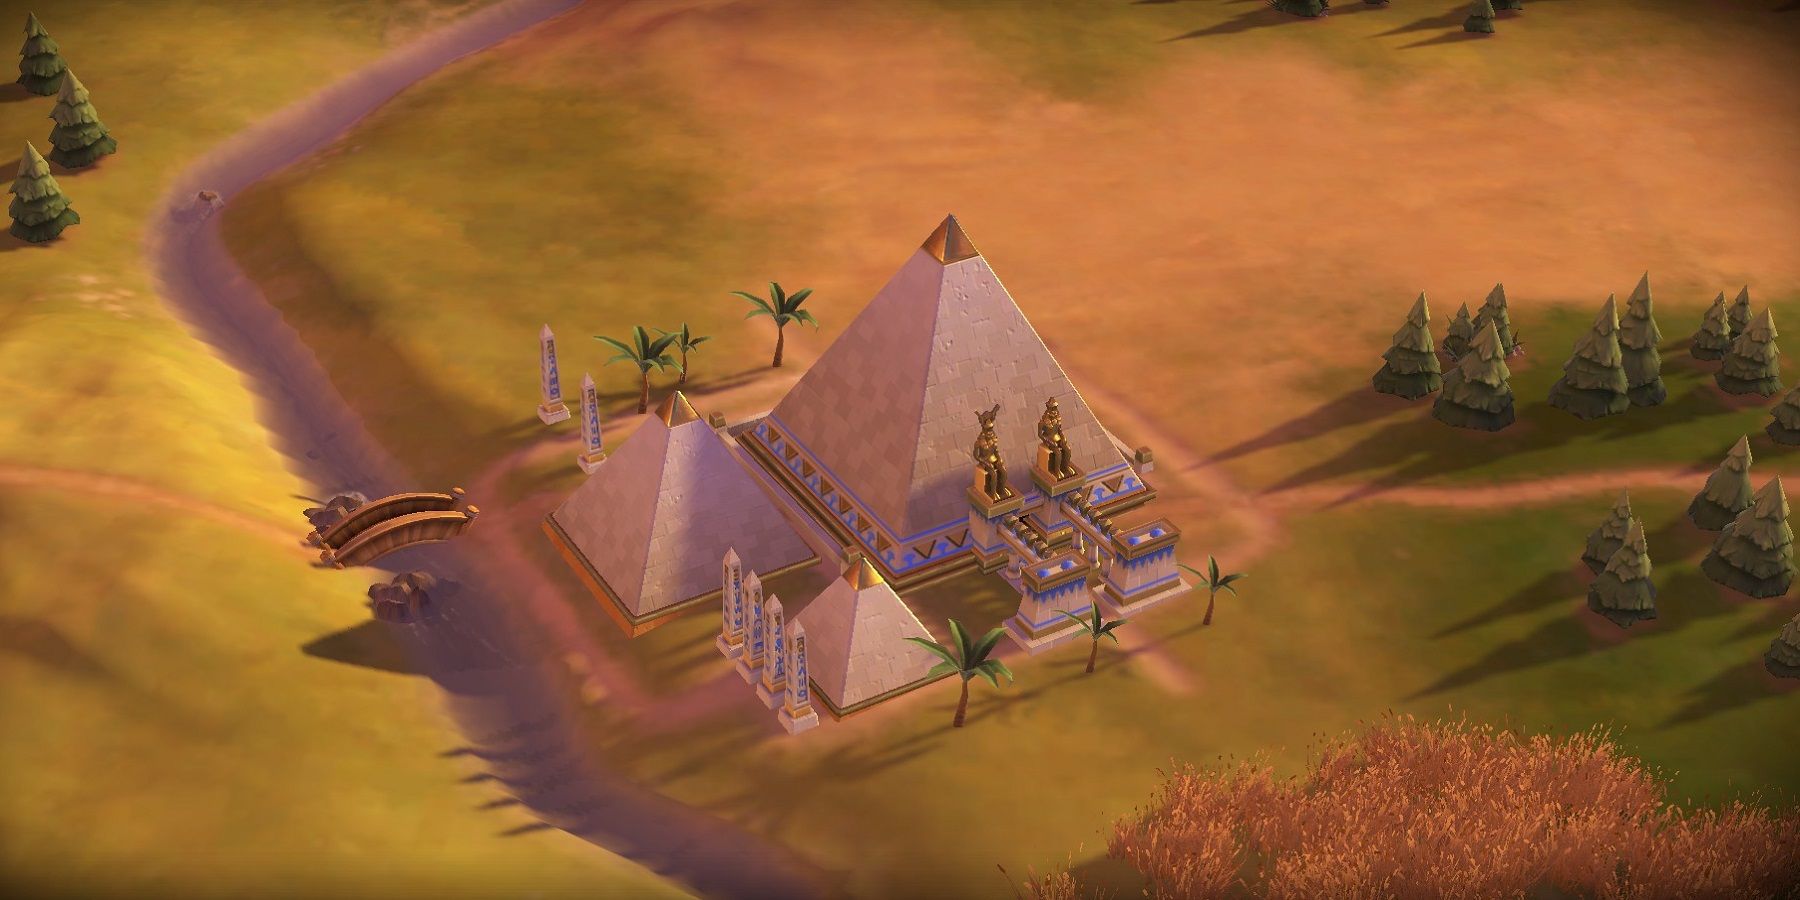 The Pyramids of Egypt, built as a Wonder in Civilization 6